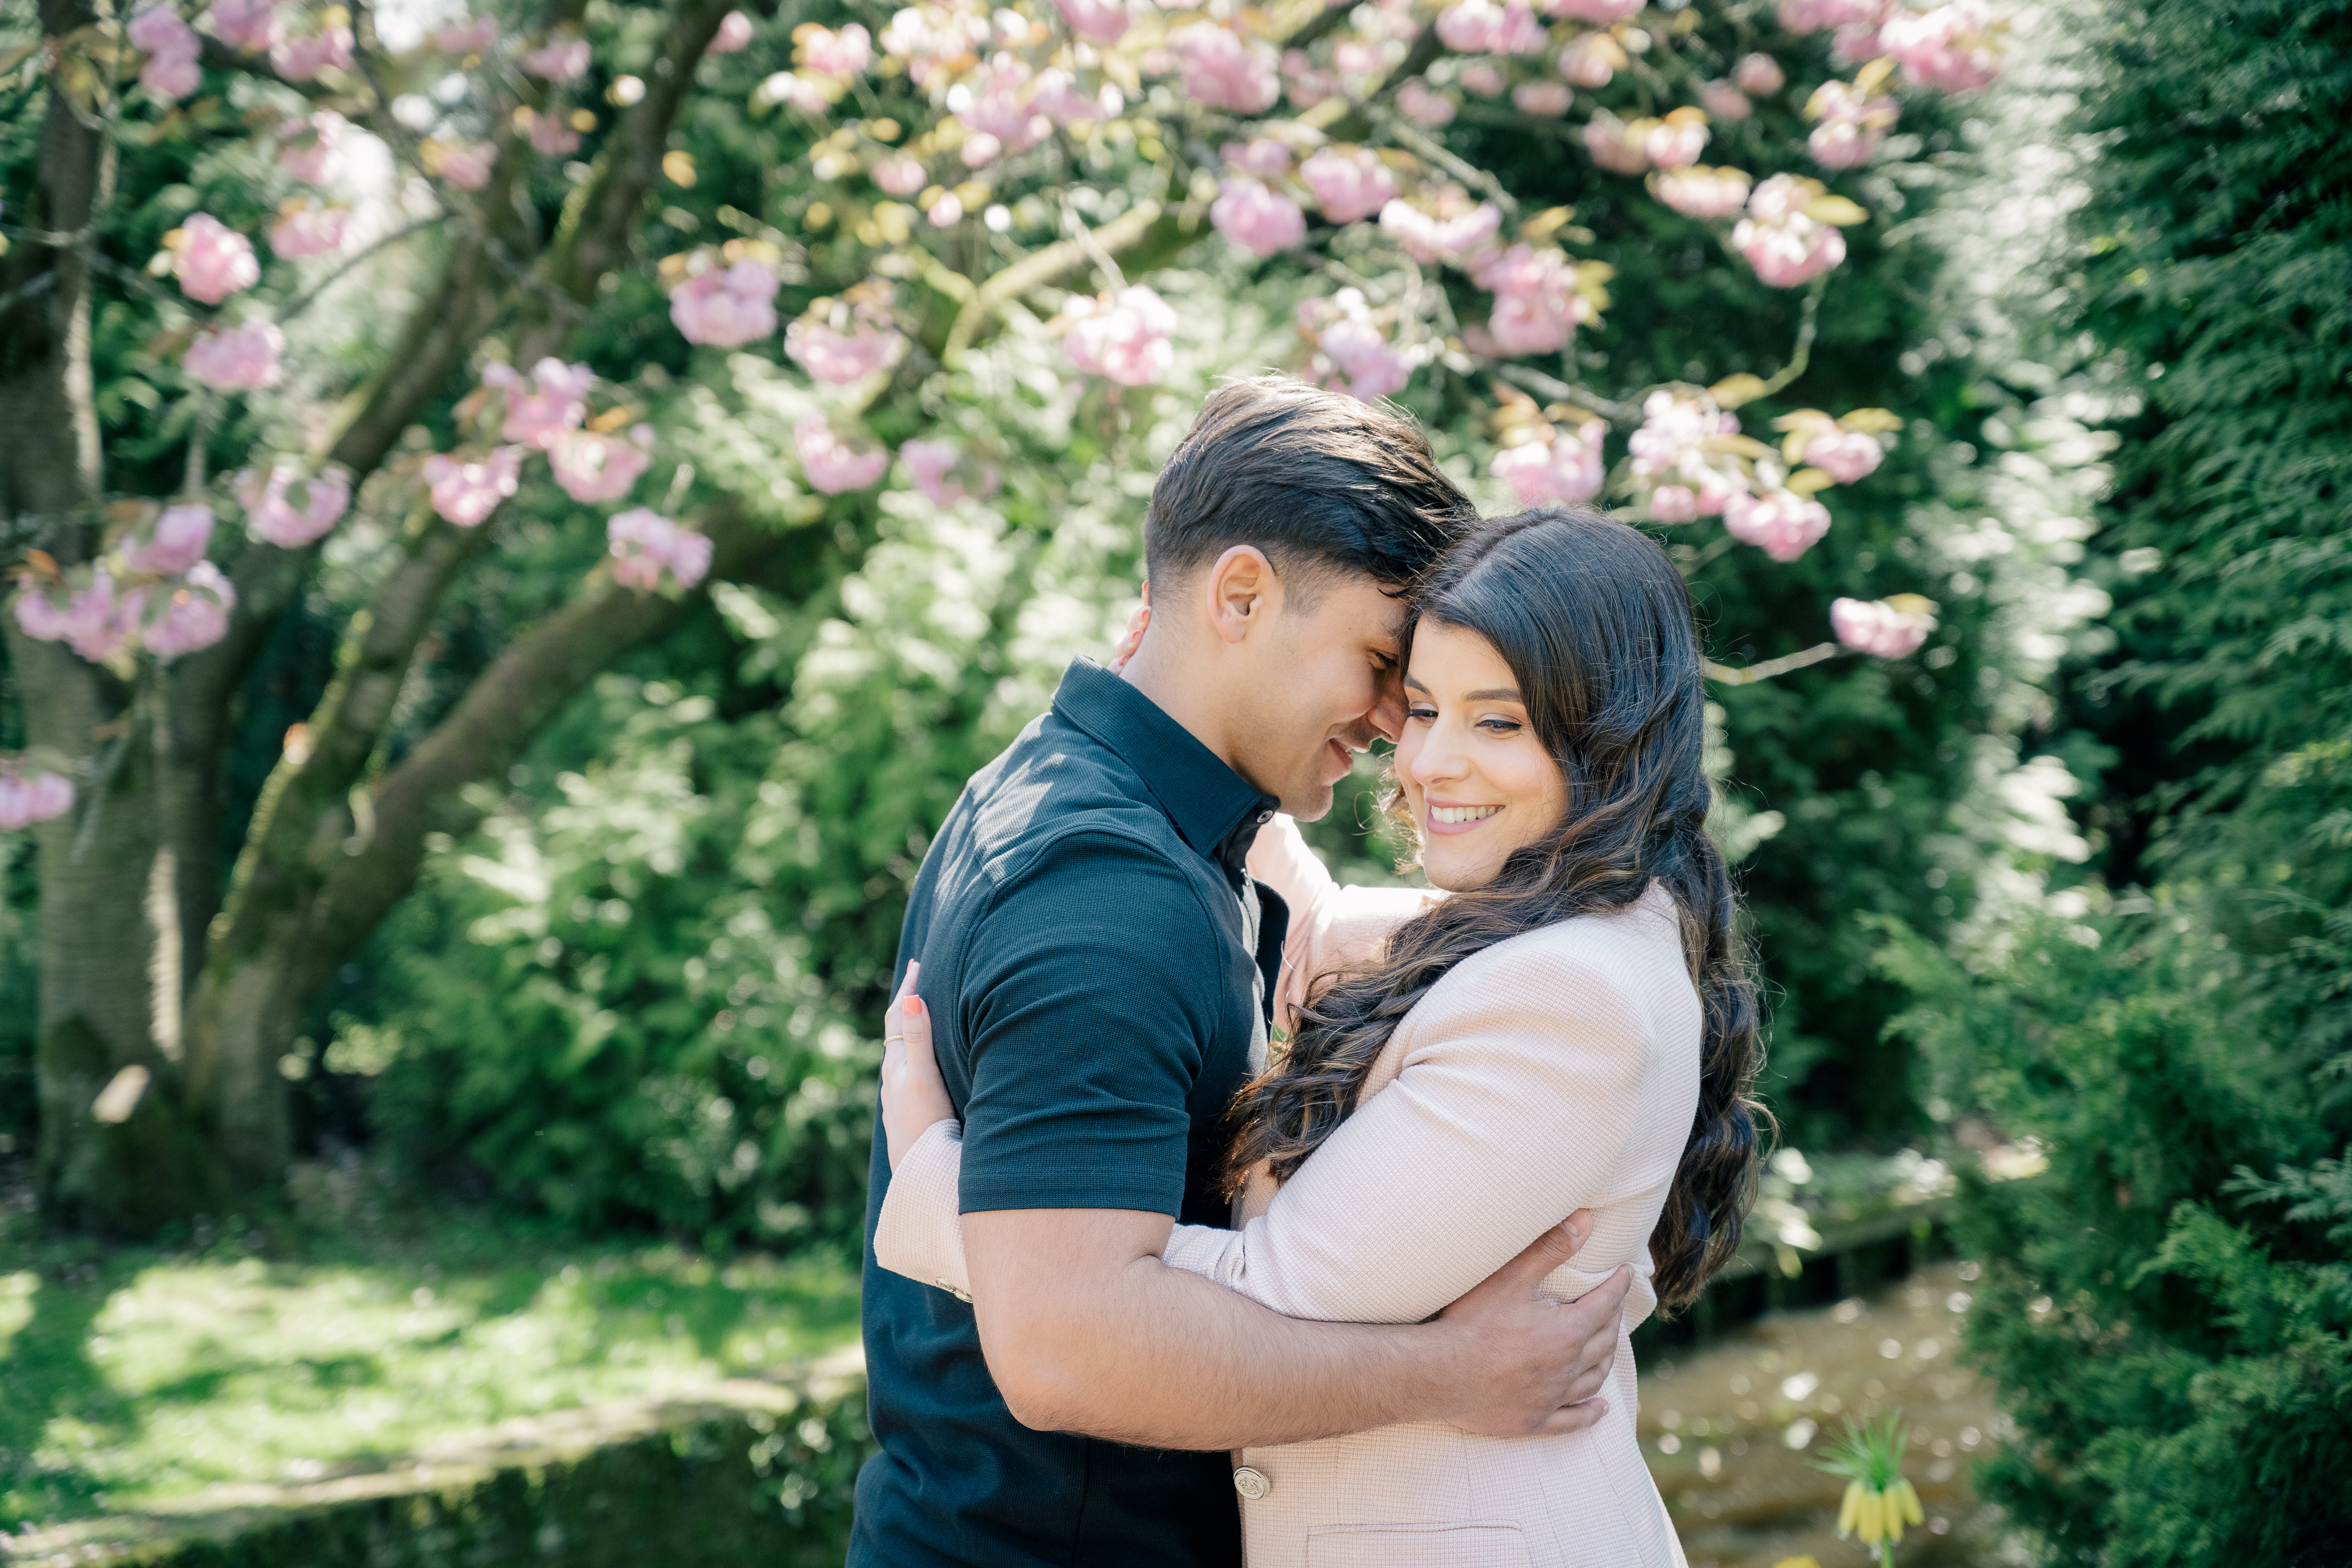 A husband and wife share a loving embrace under a blooming magnolia tree in a sun dappled Keukenhof